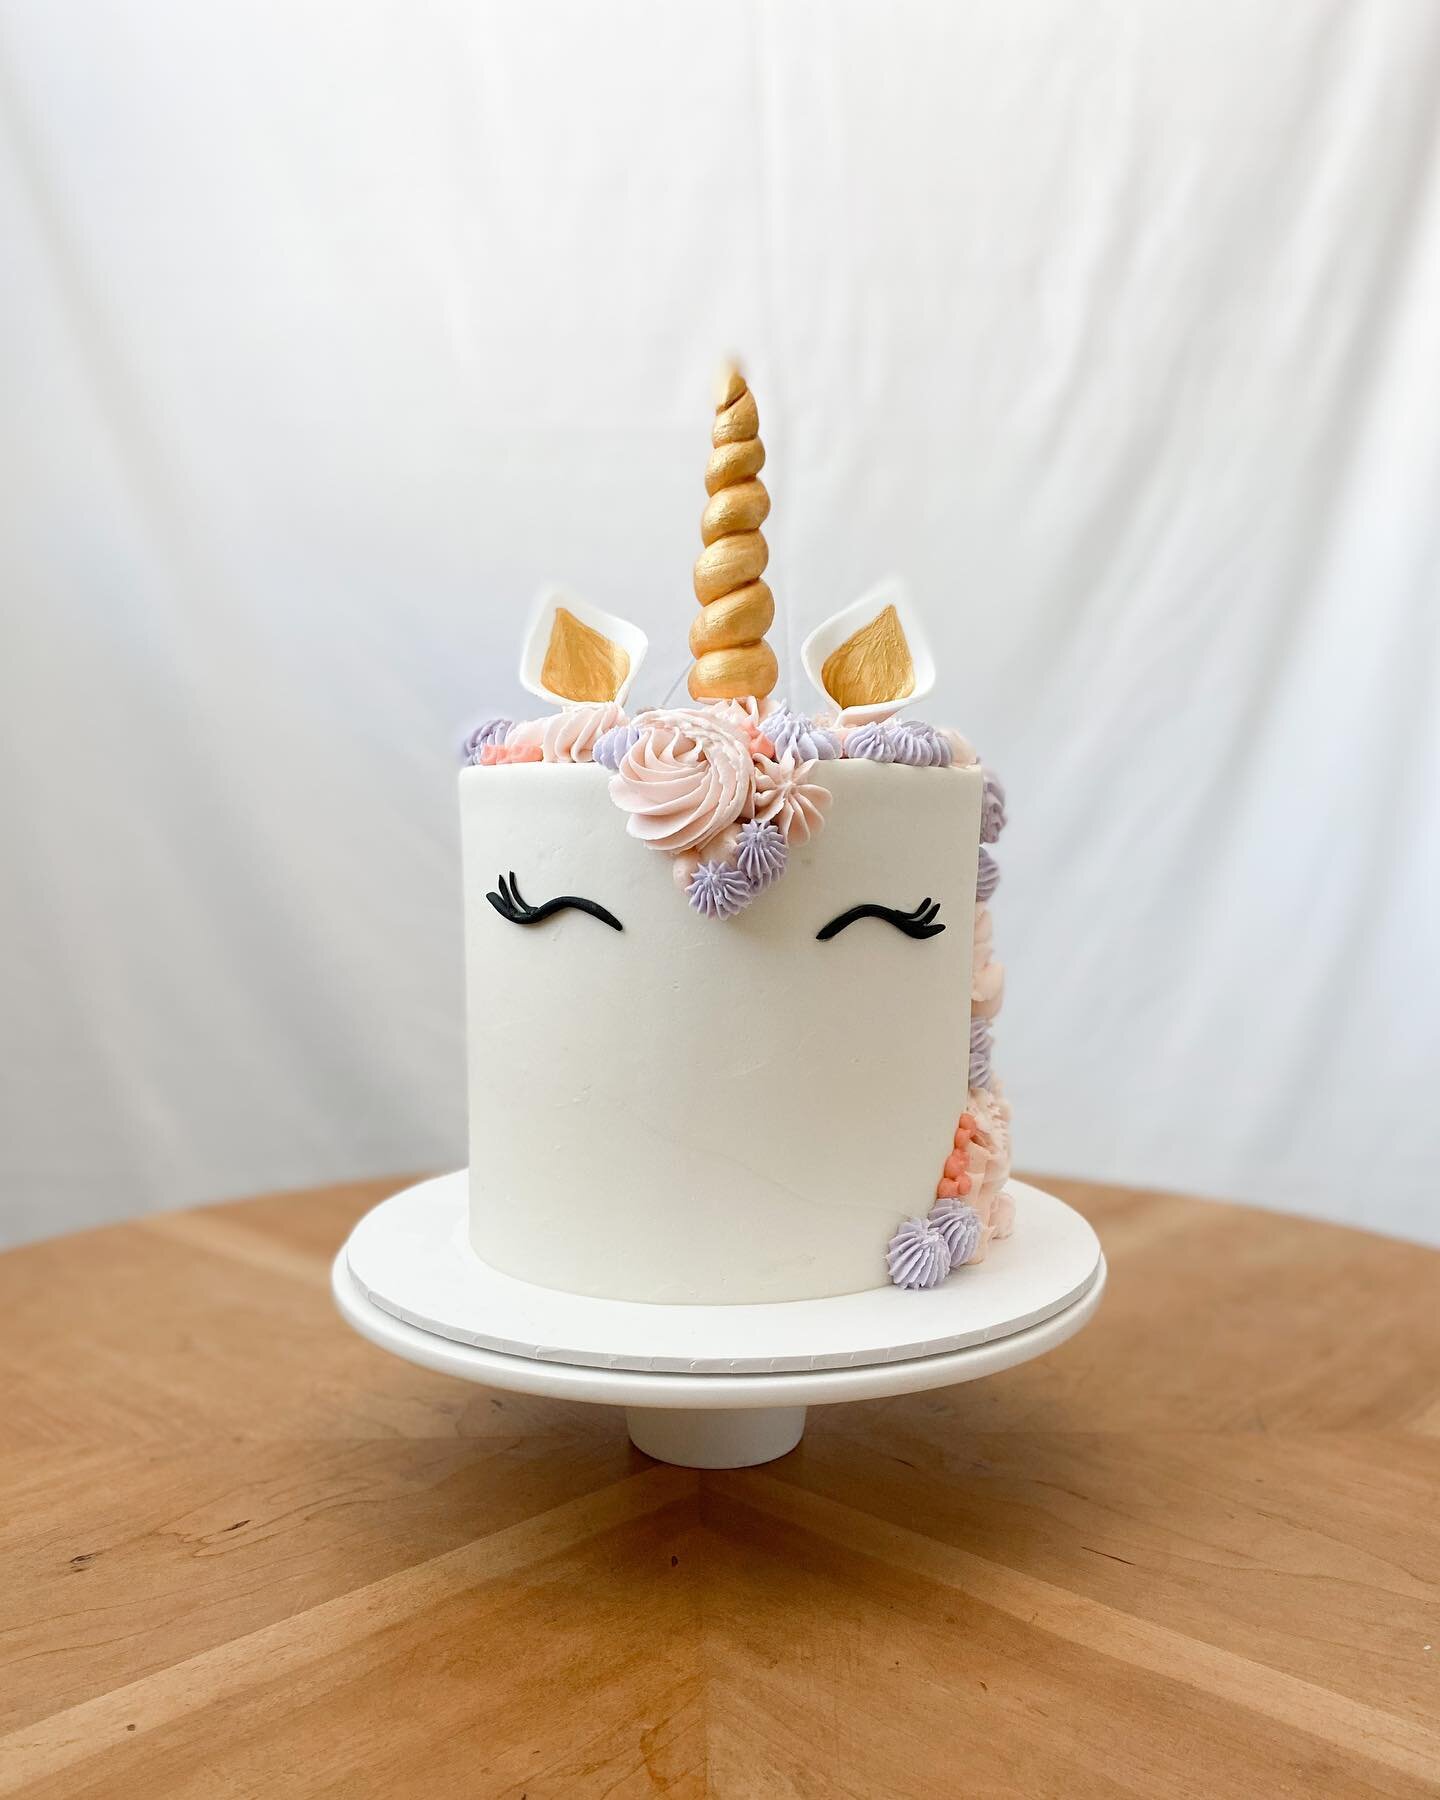 Unicorn Cake ✨ 

I finally made a Unicorn cake!! It was on my cake bucket list for ages &amp; I finally can cross it off! And I loved every second! 🤍